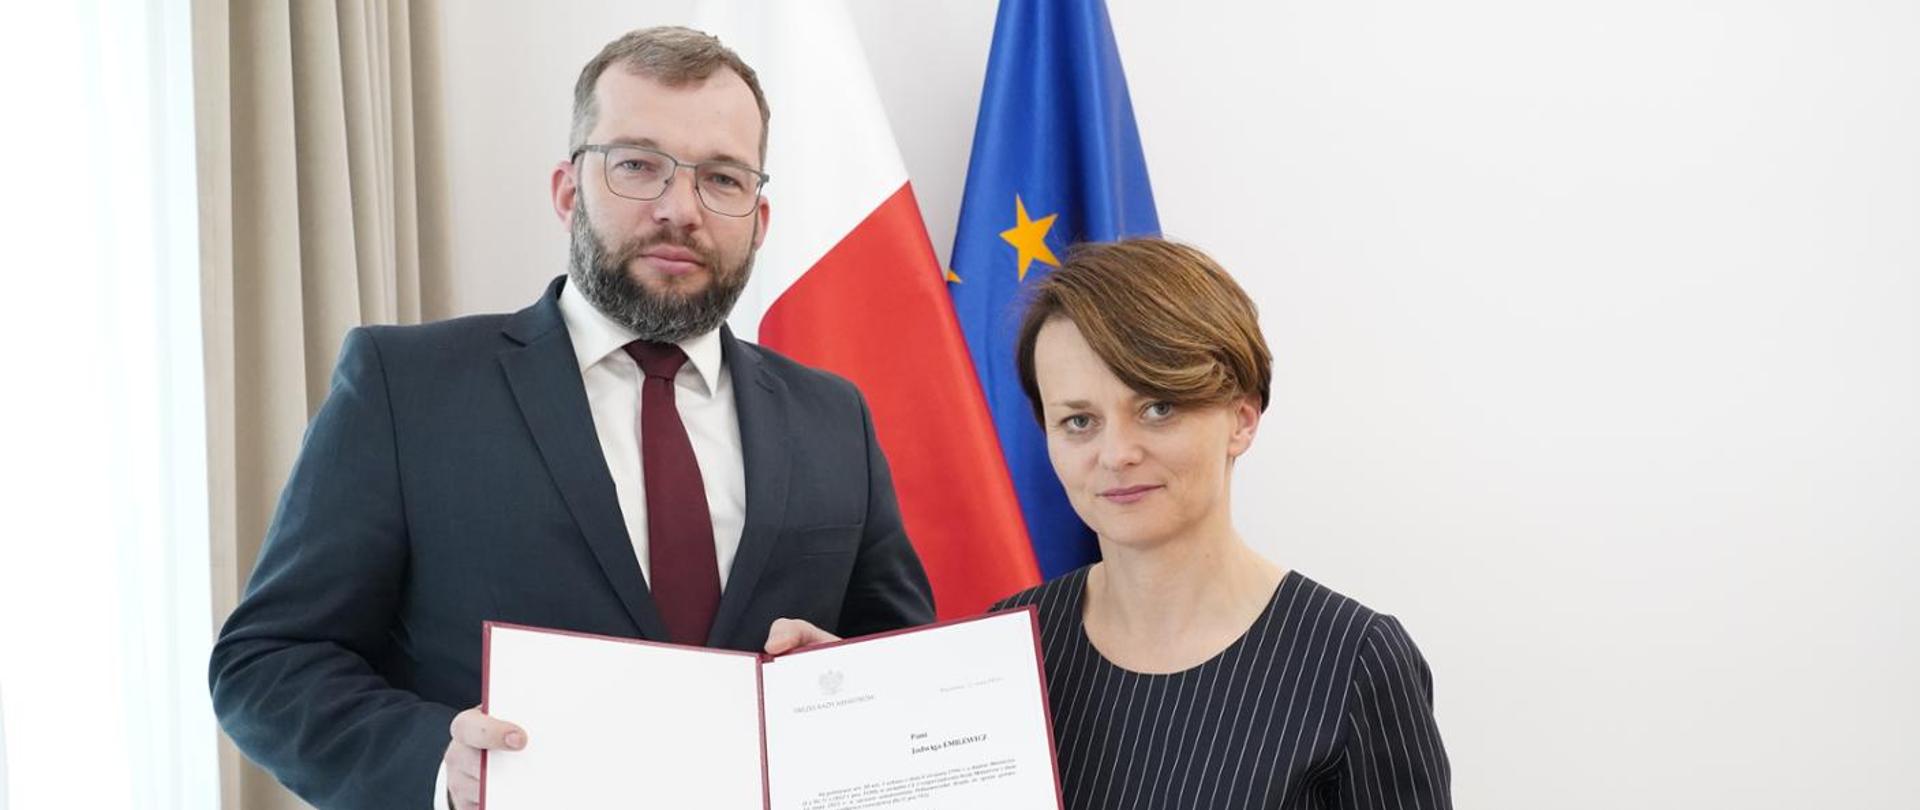 Jadwiga Emilewicz appointed as the Government Plenipotentiary for Polish-Ukrainian Development Cooperation